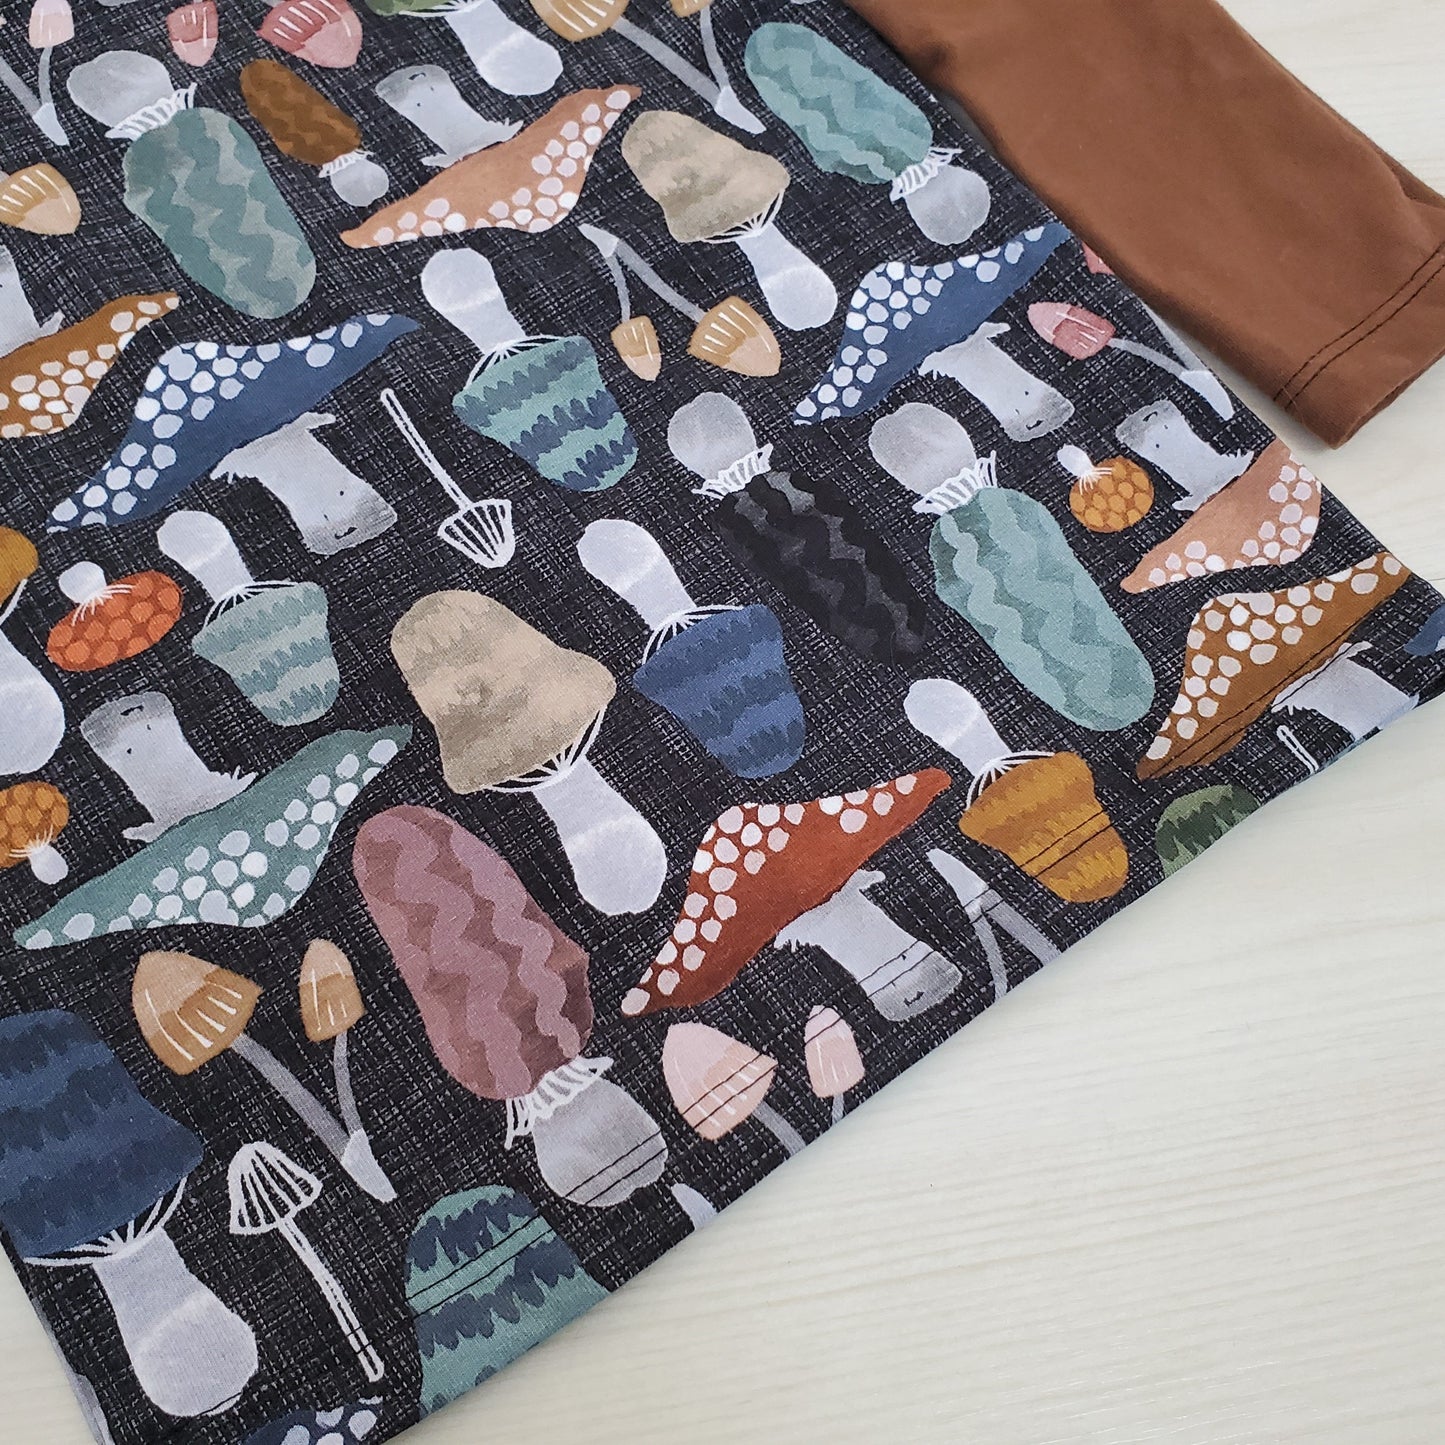 Organic Cotton Kid's Shirt with Toadstools